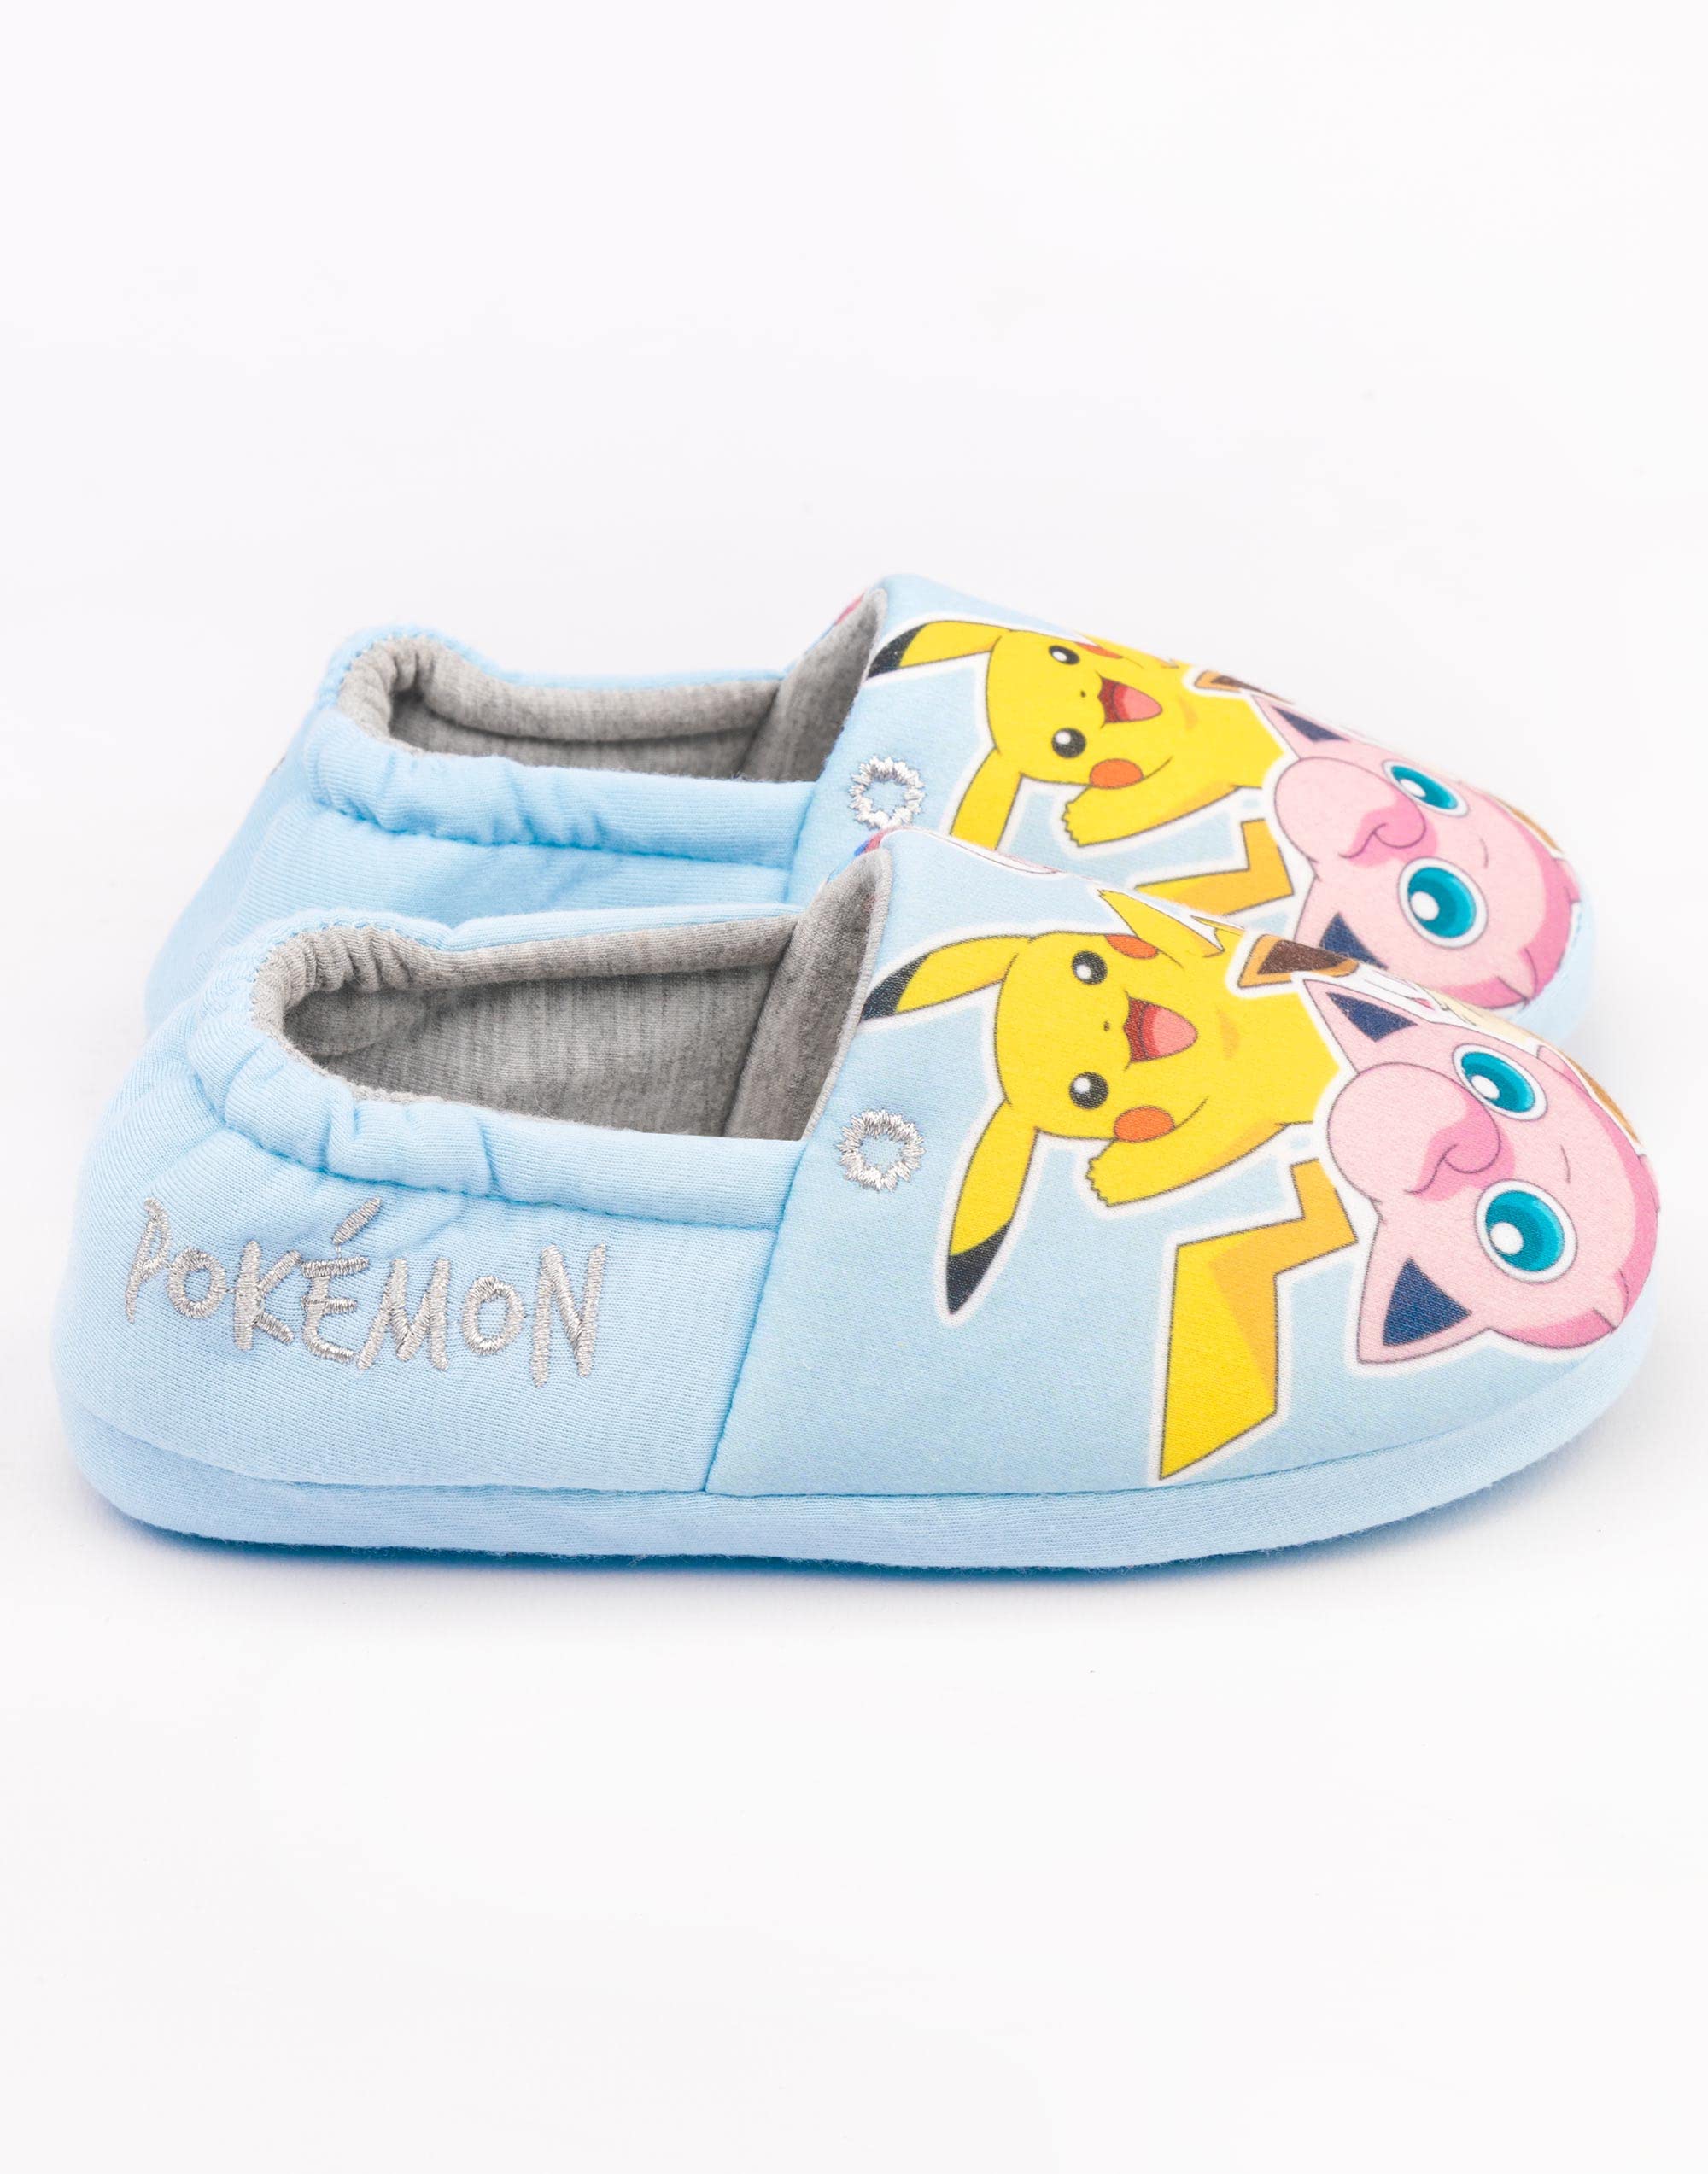 Pokemon Slippers Girls Kids Pikachu Sylveon Evee Blue Shoes Loafers